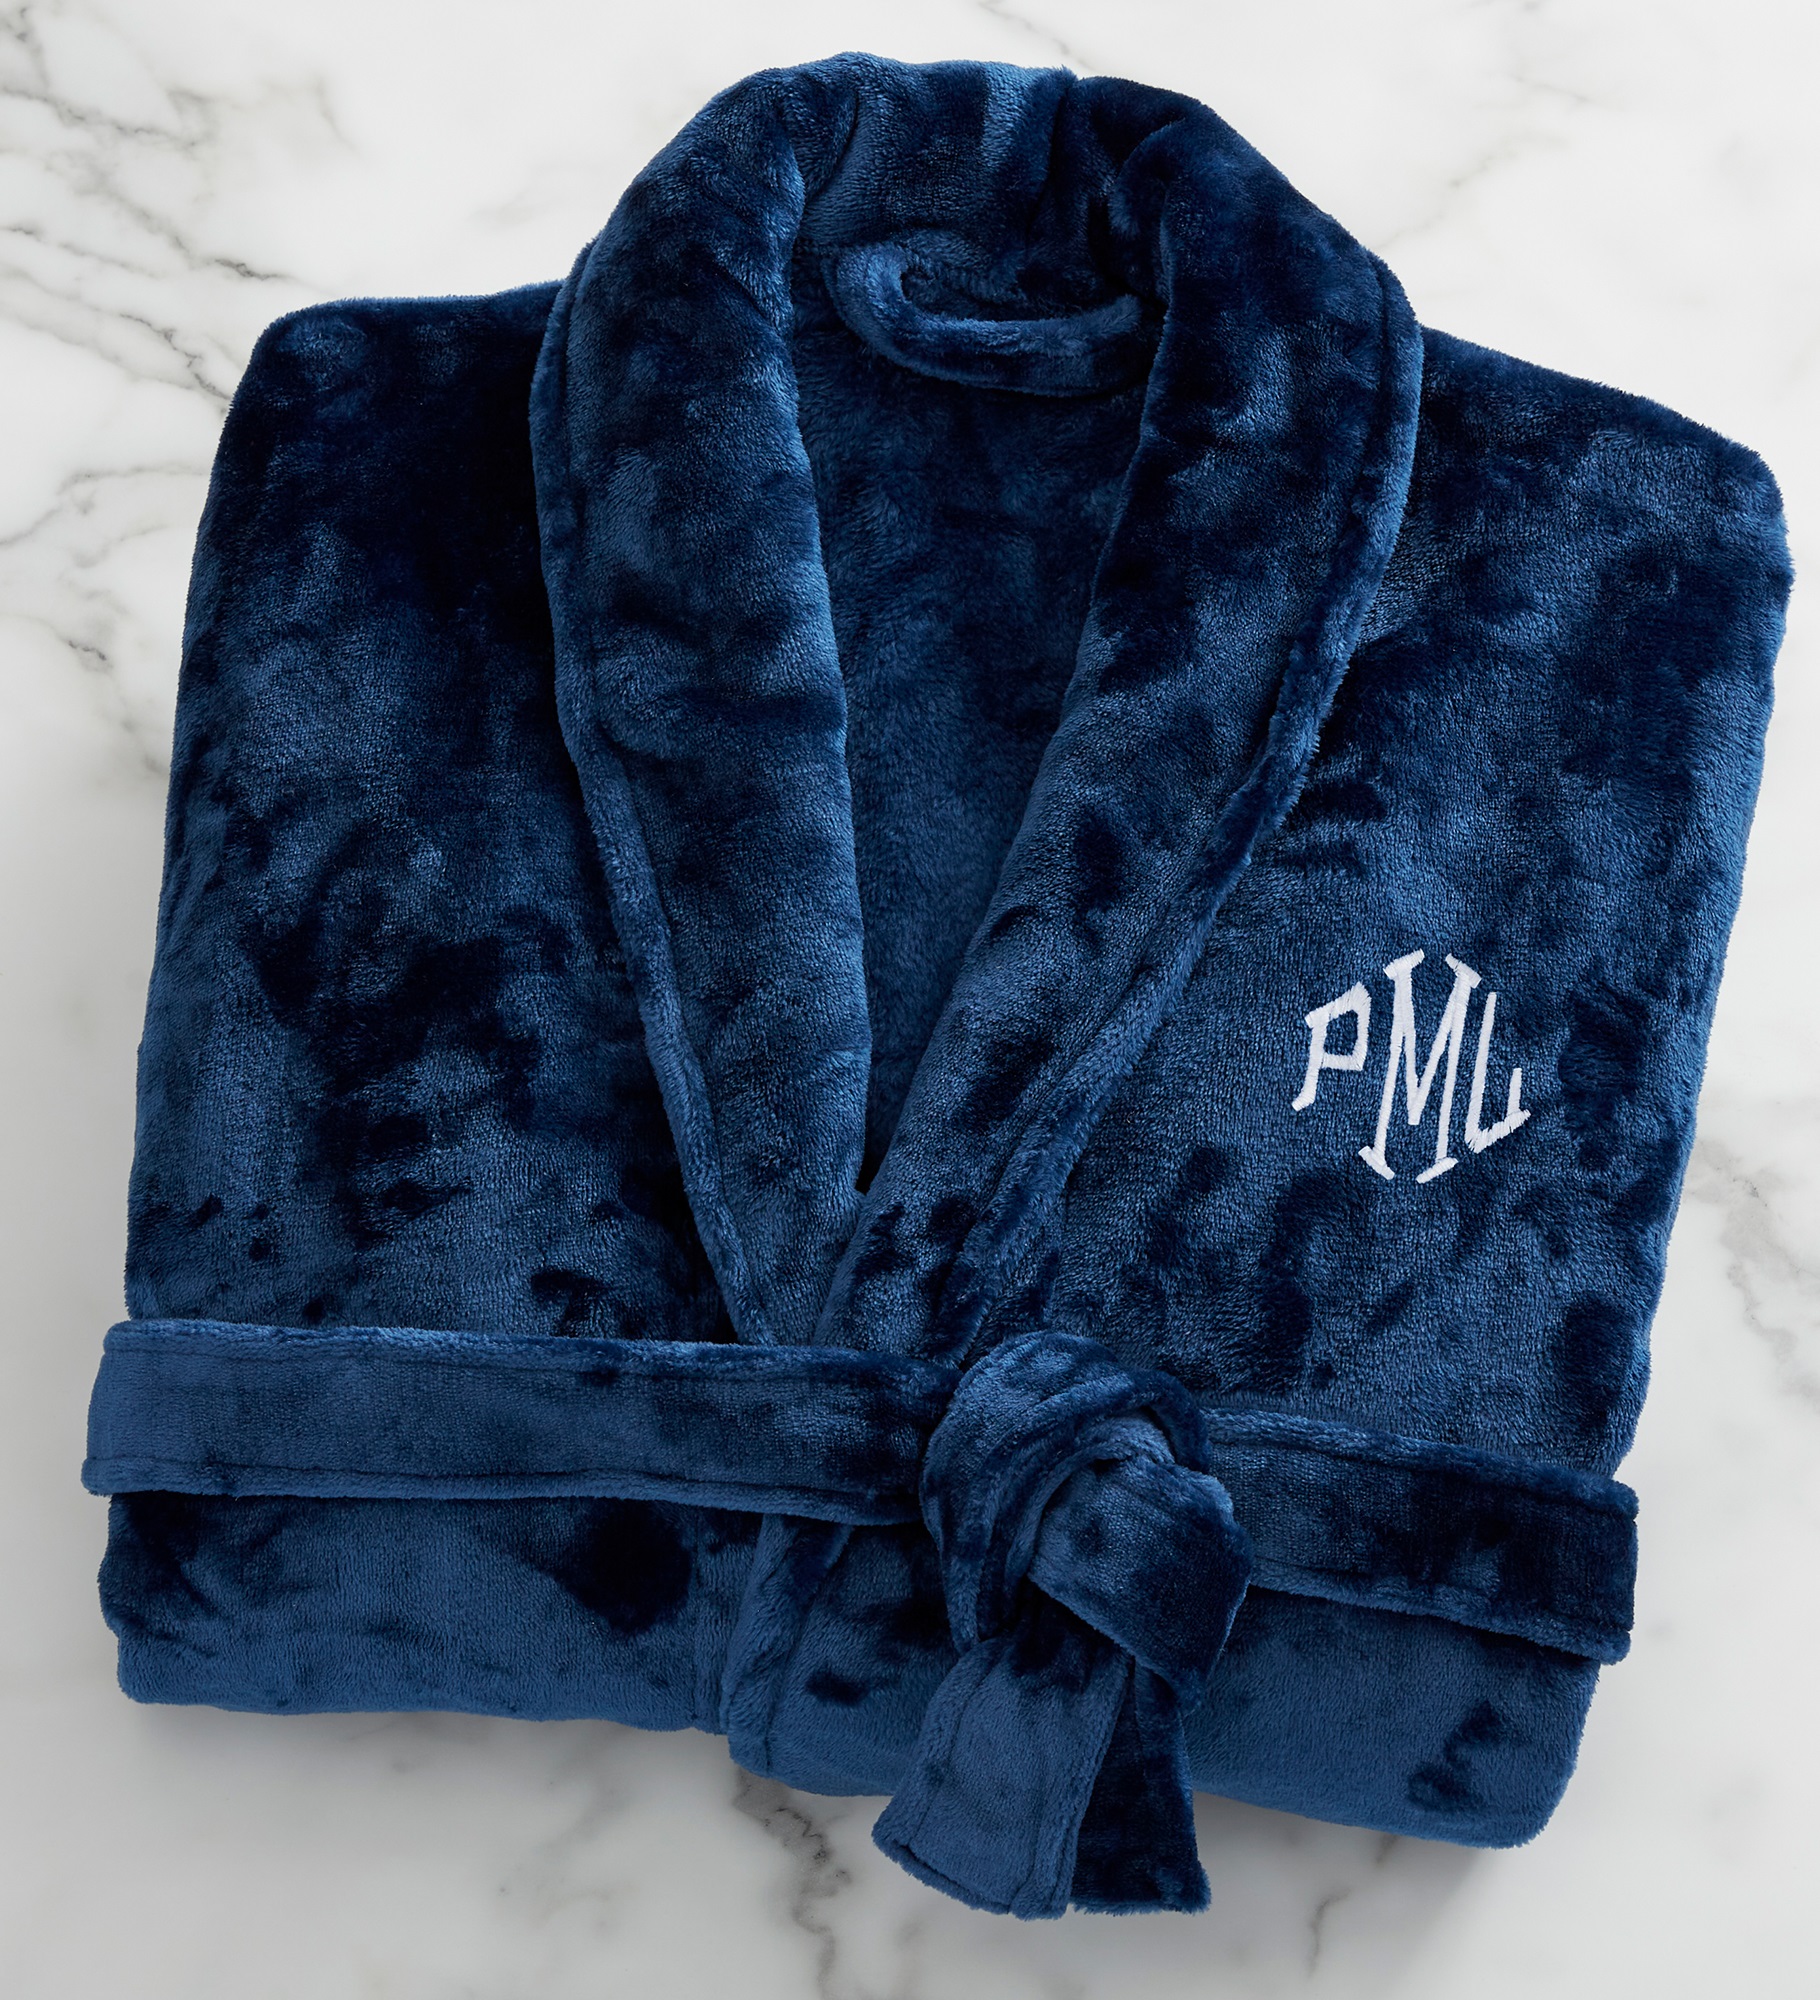 Just For Him Personalized Luxury Fleece Robe